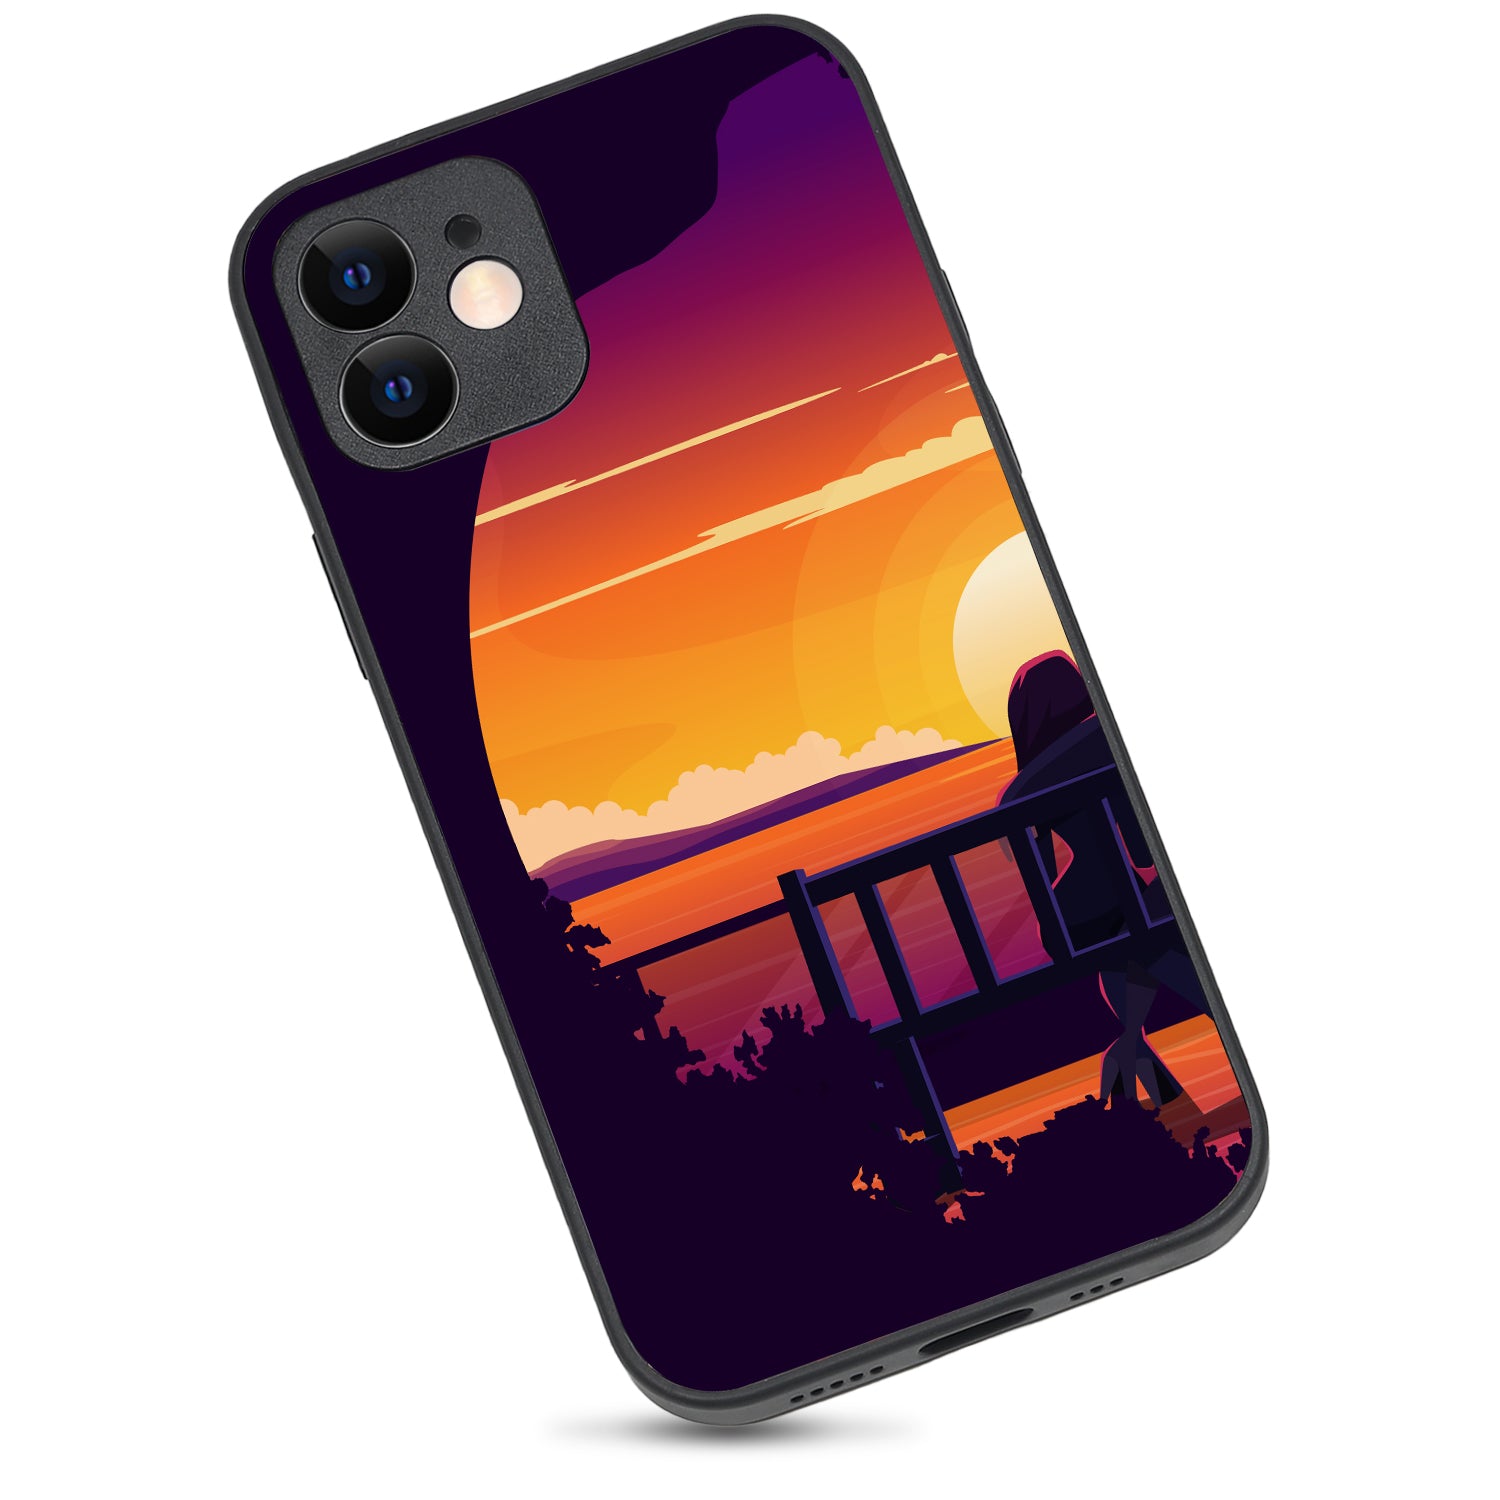 Sunset Date Girl Couple iPhone 12 Case